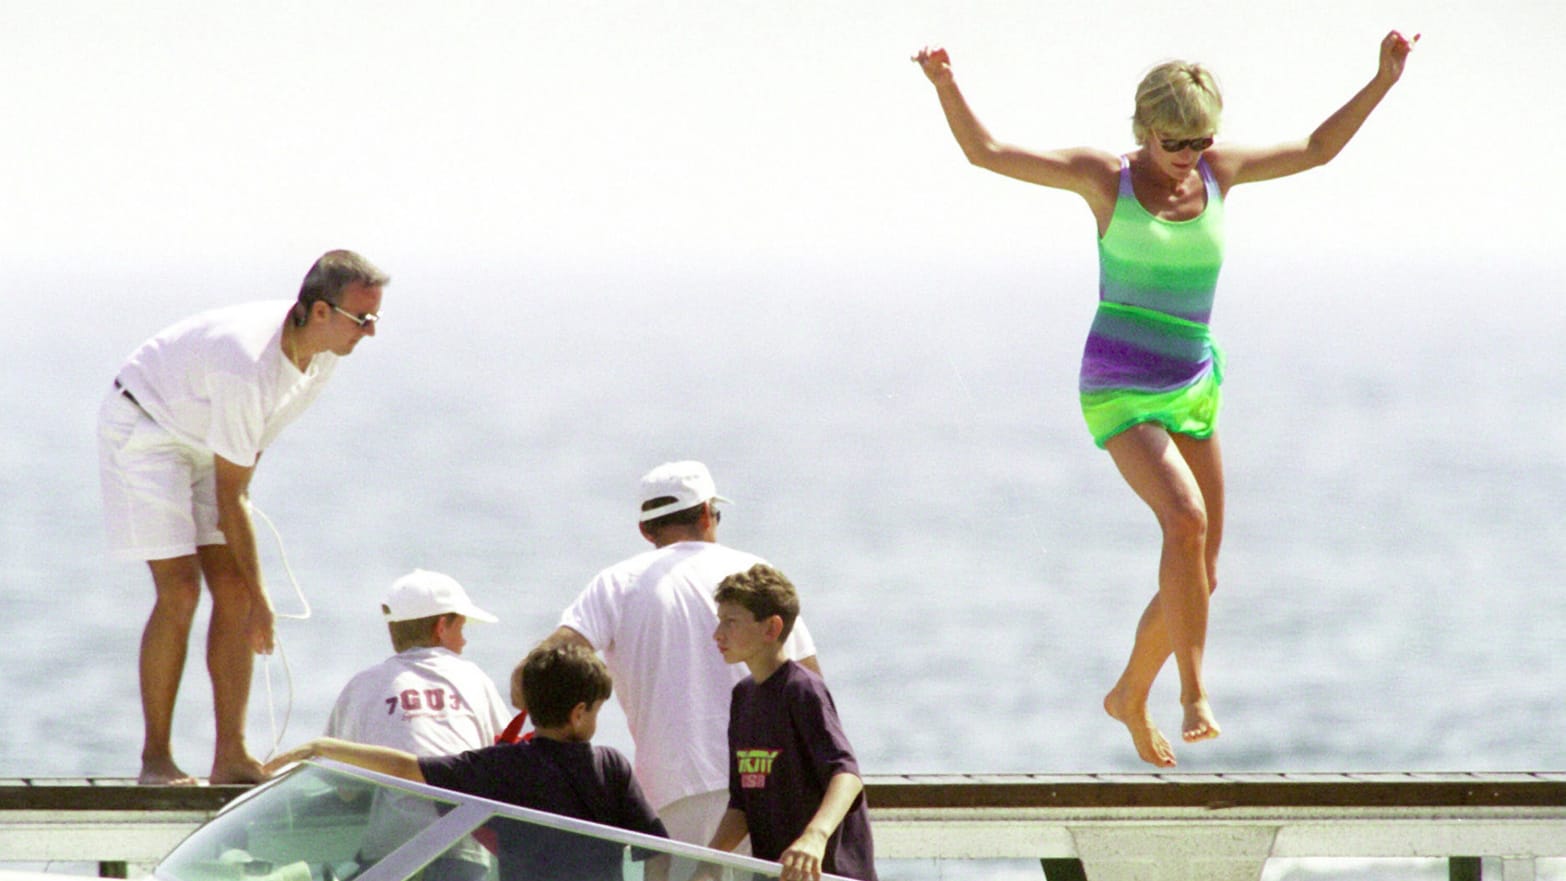 Princess Diana and Dodi Fayed ‘Love Boat’ Sinks to the Bottom of the Sea